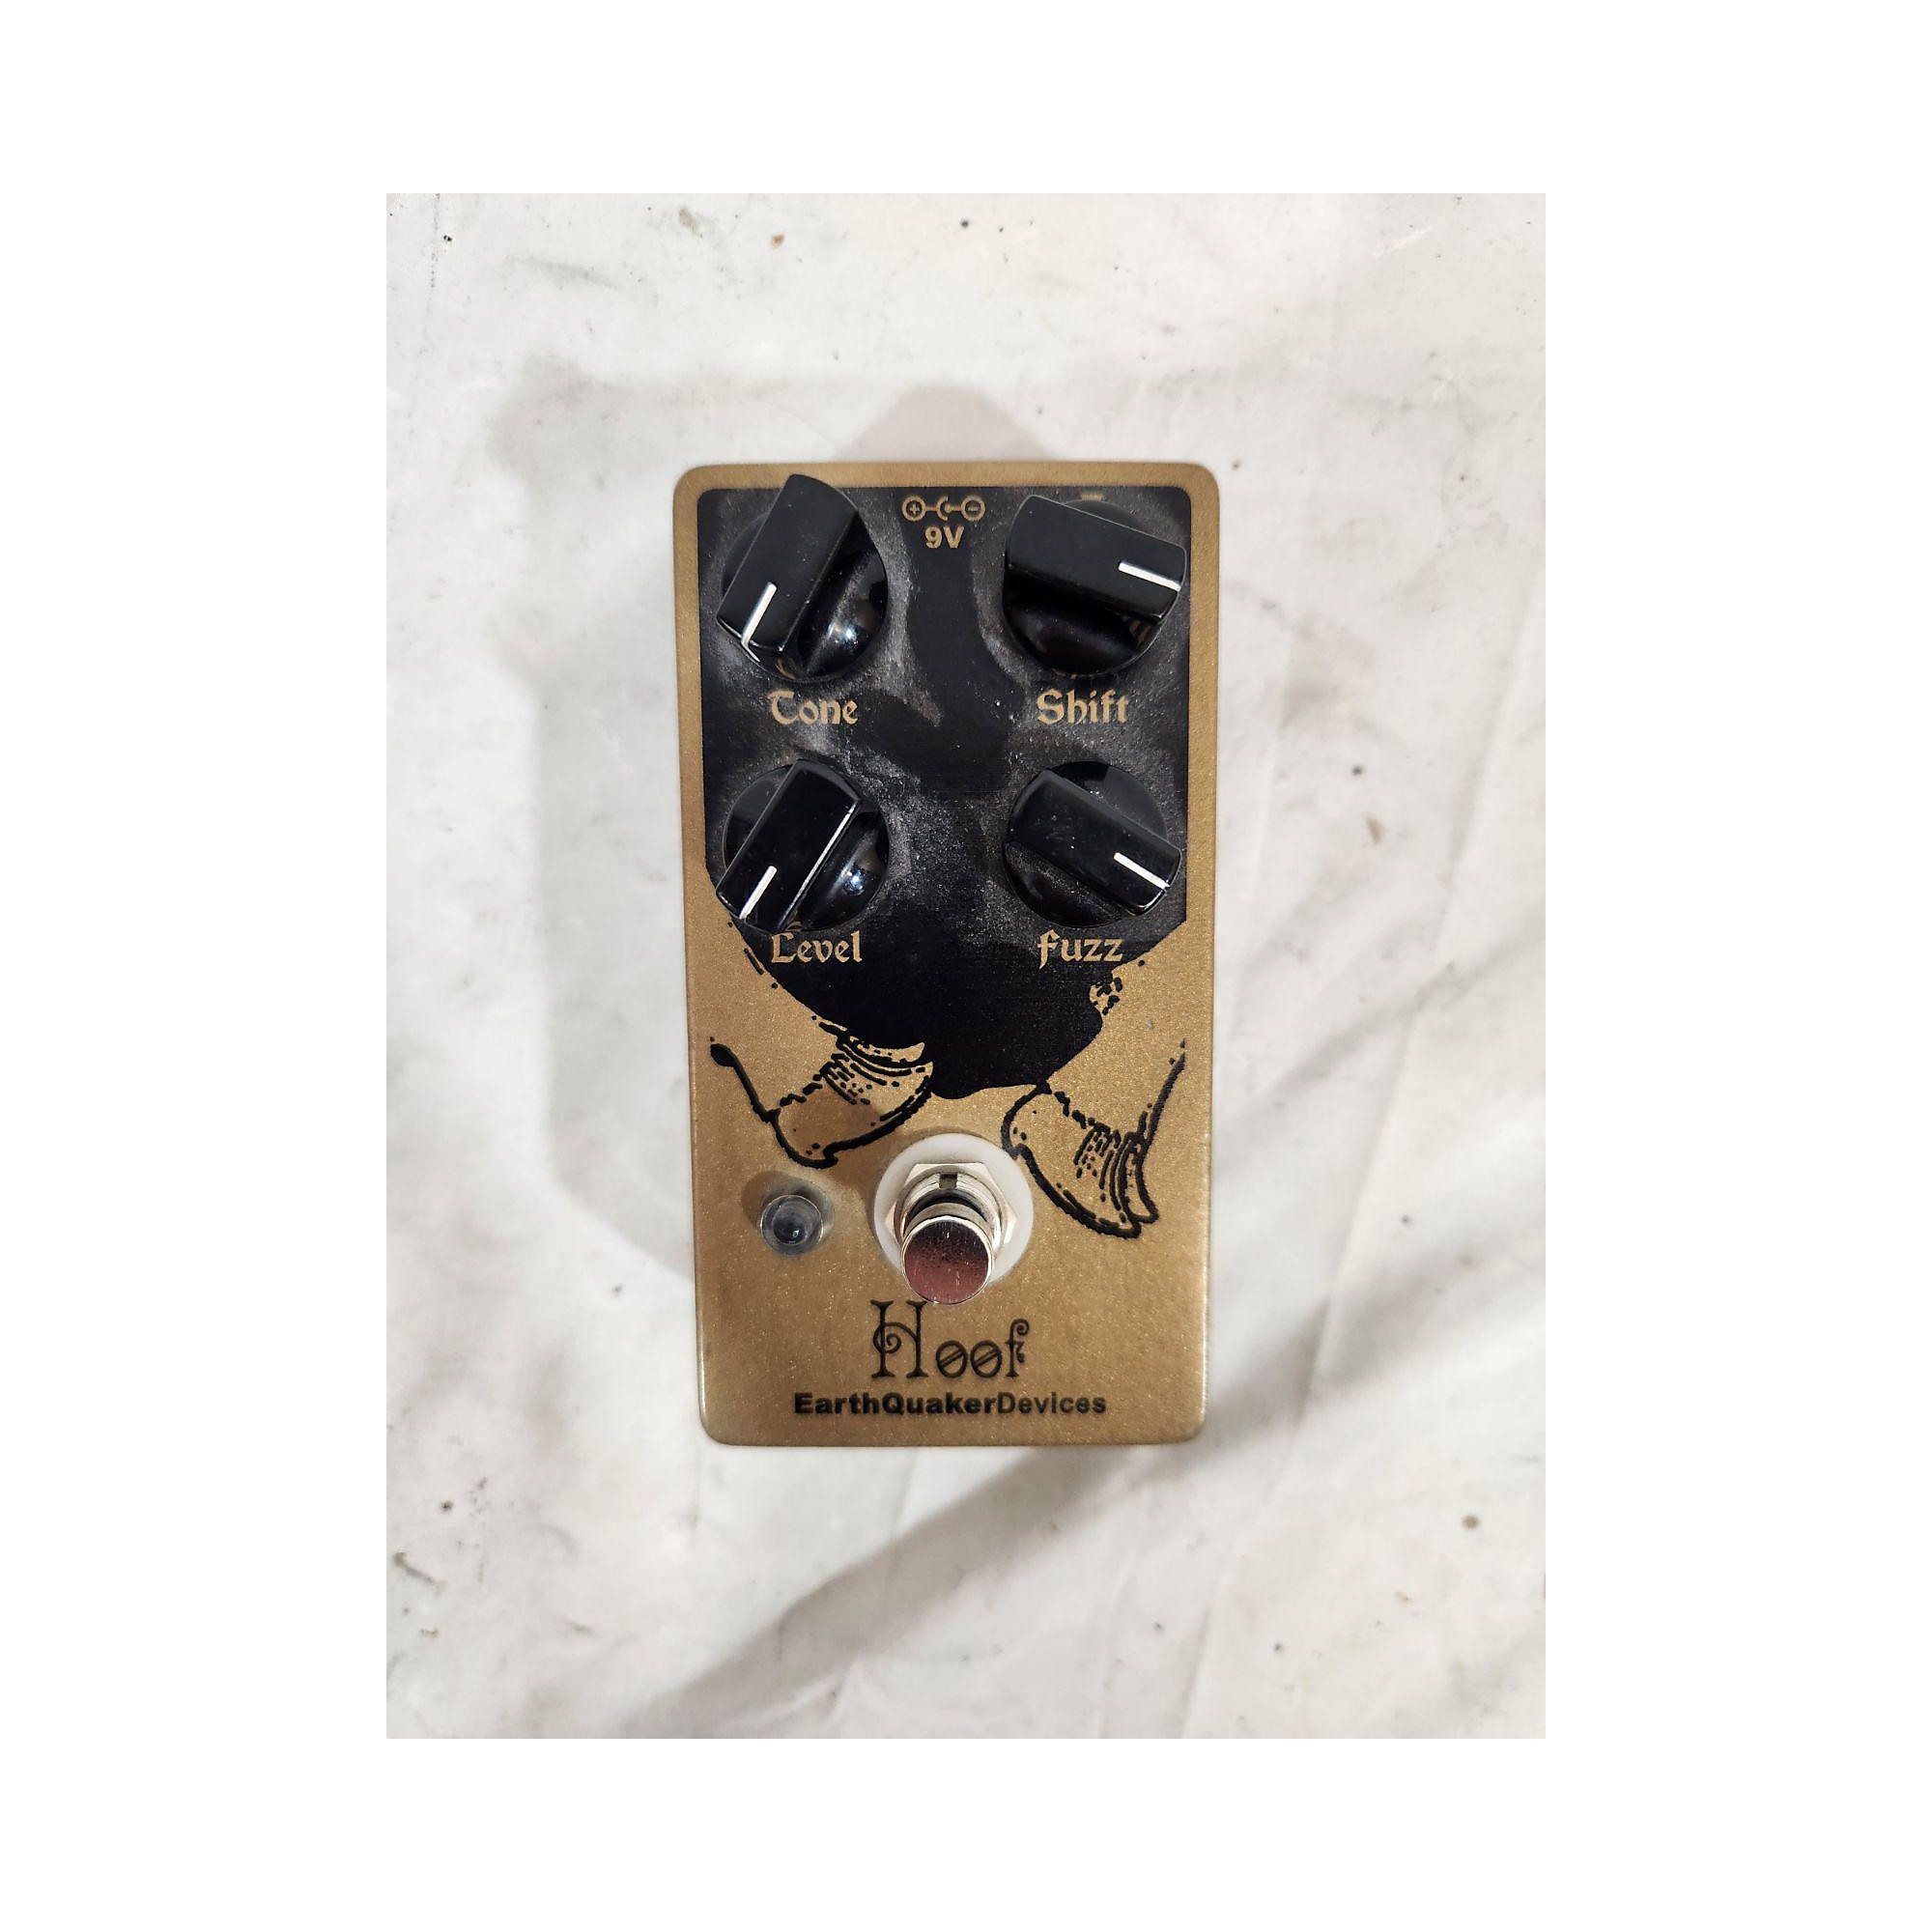 Used EarthQuaker Devices Hoof Germanium/Silicon Hybrid Fuzz Effect